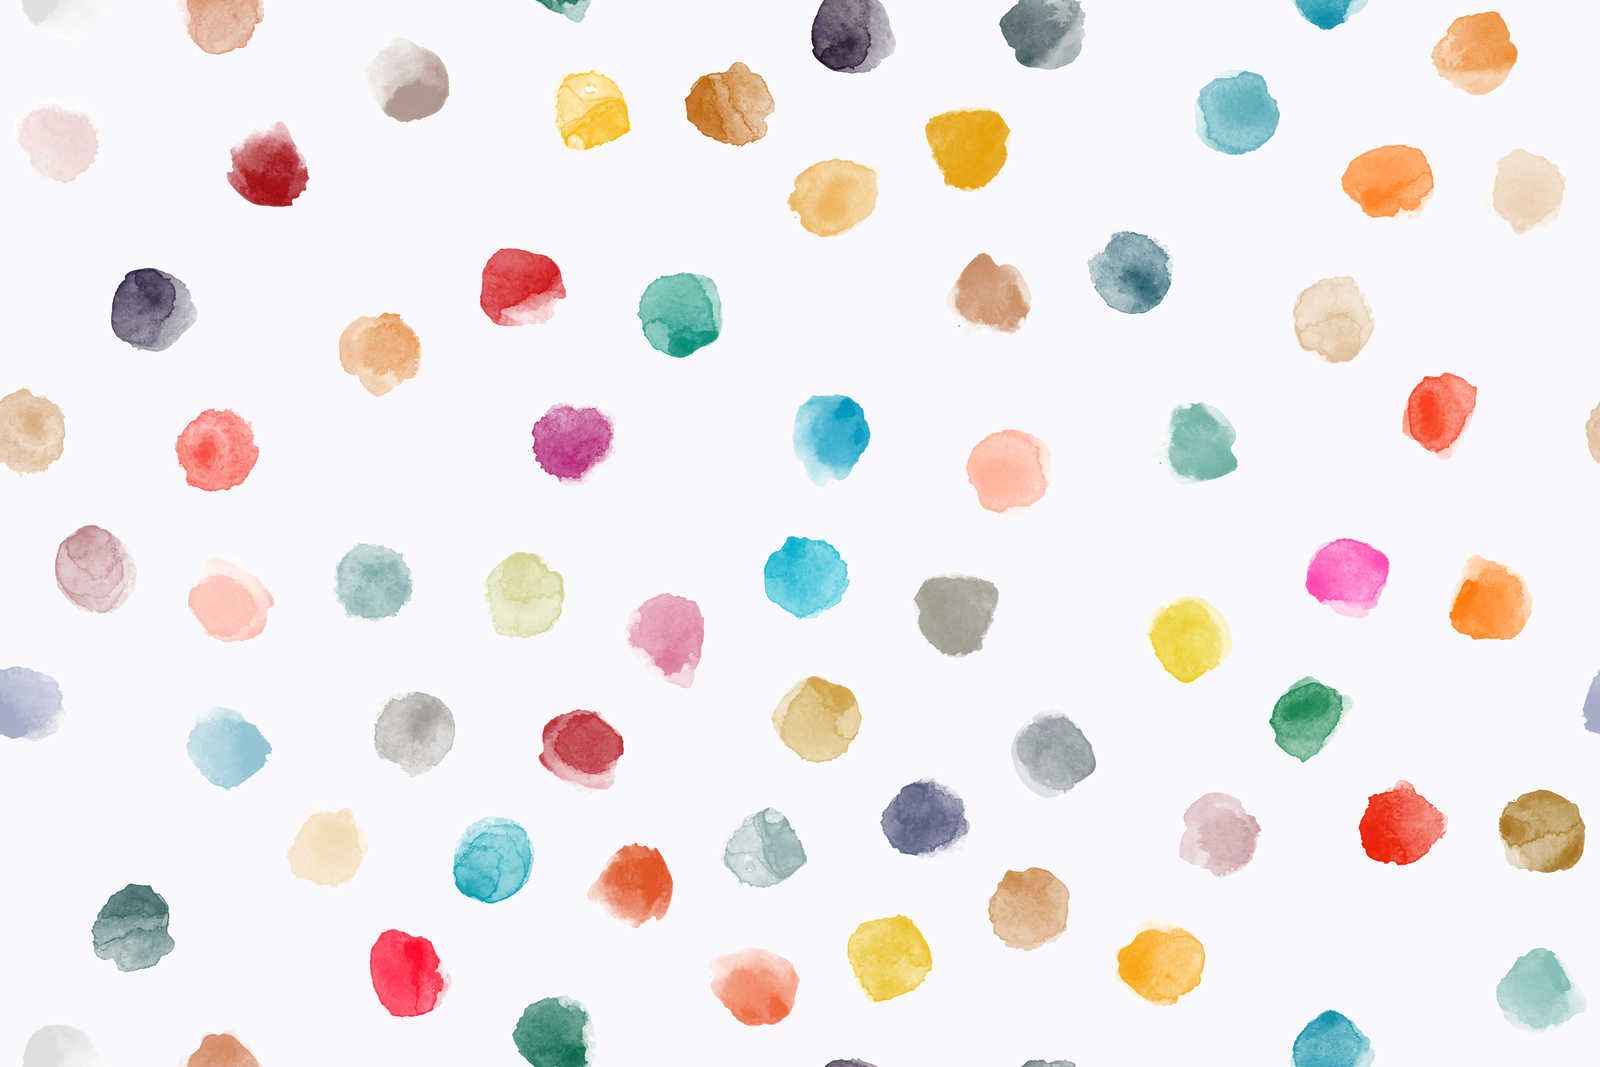             Canvas for children's room with colourful dots - 120 cm x 80 cm
        